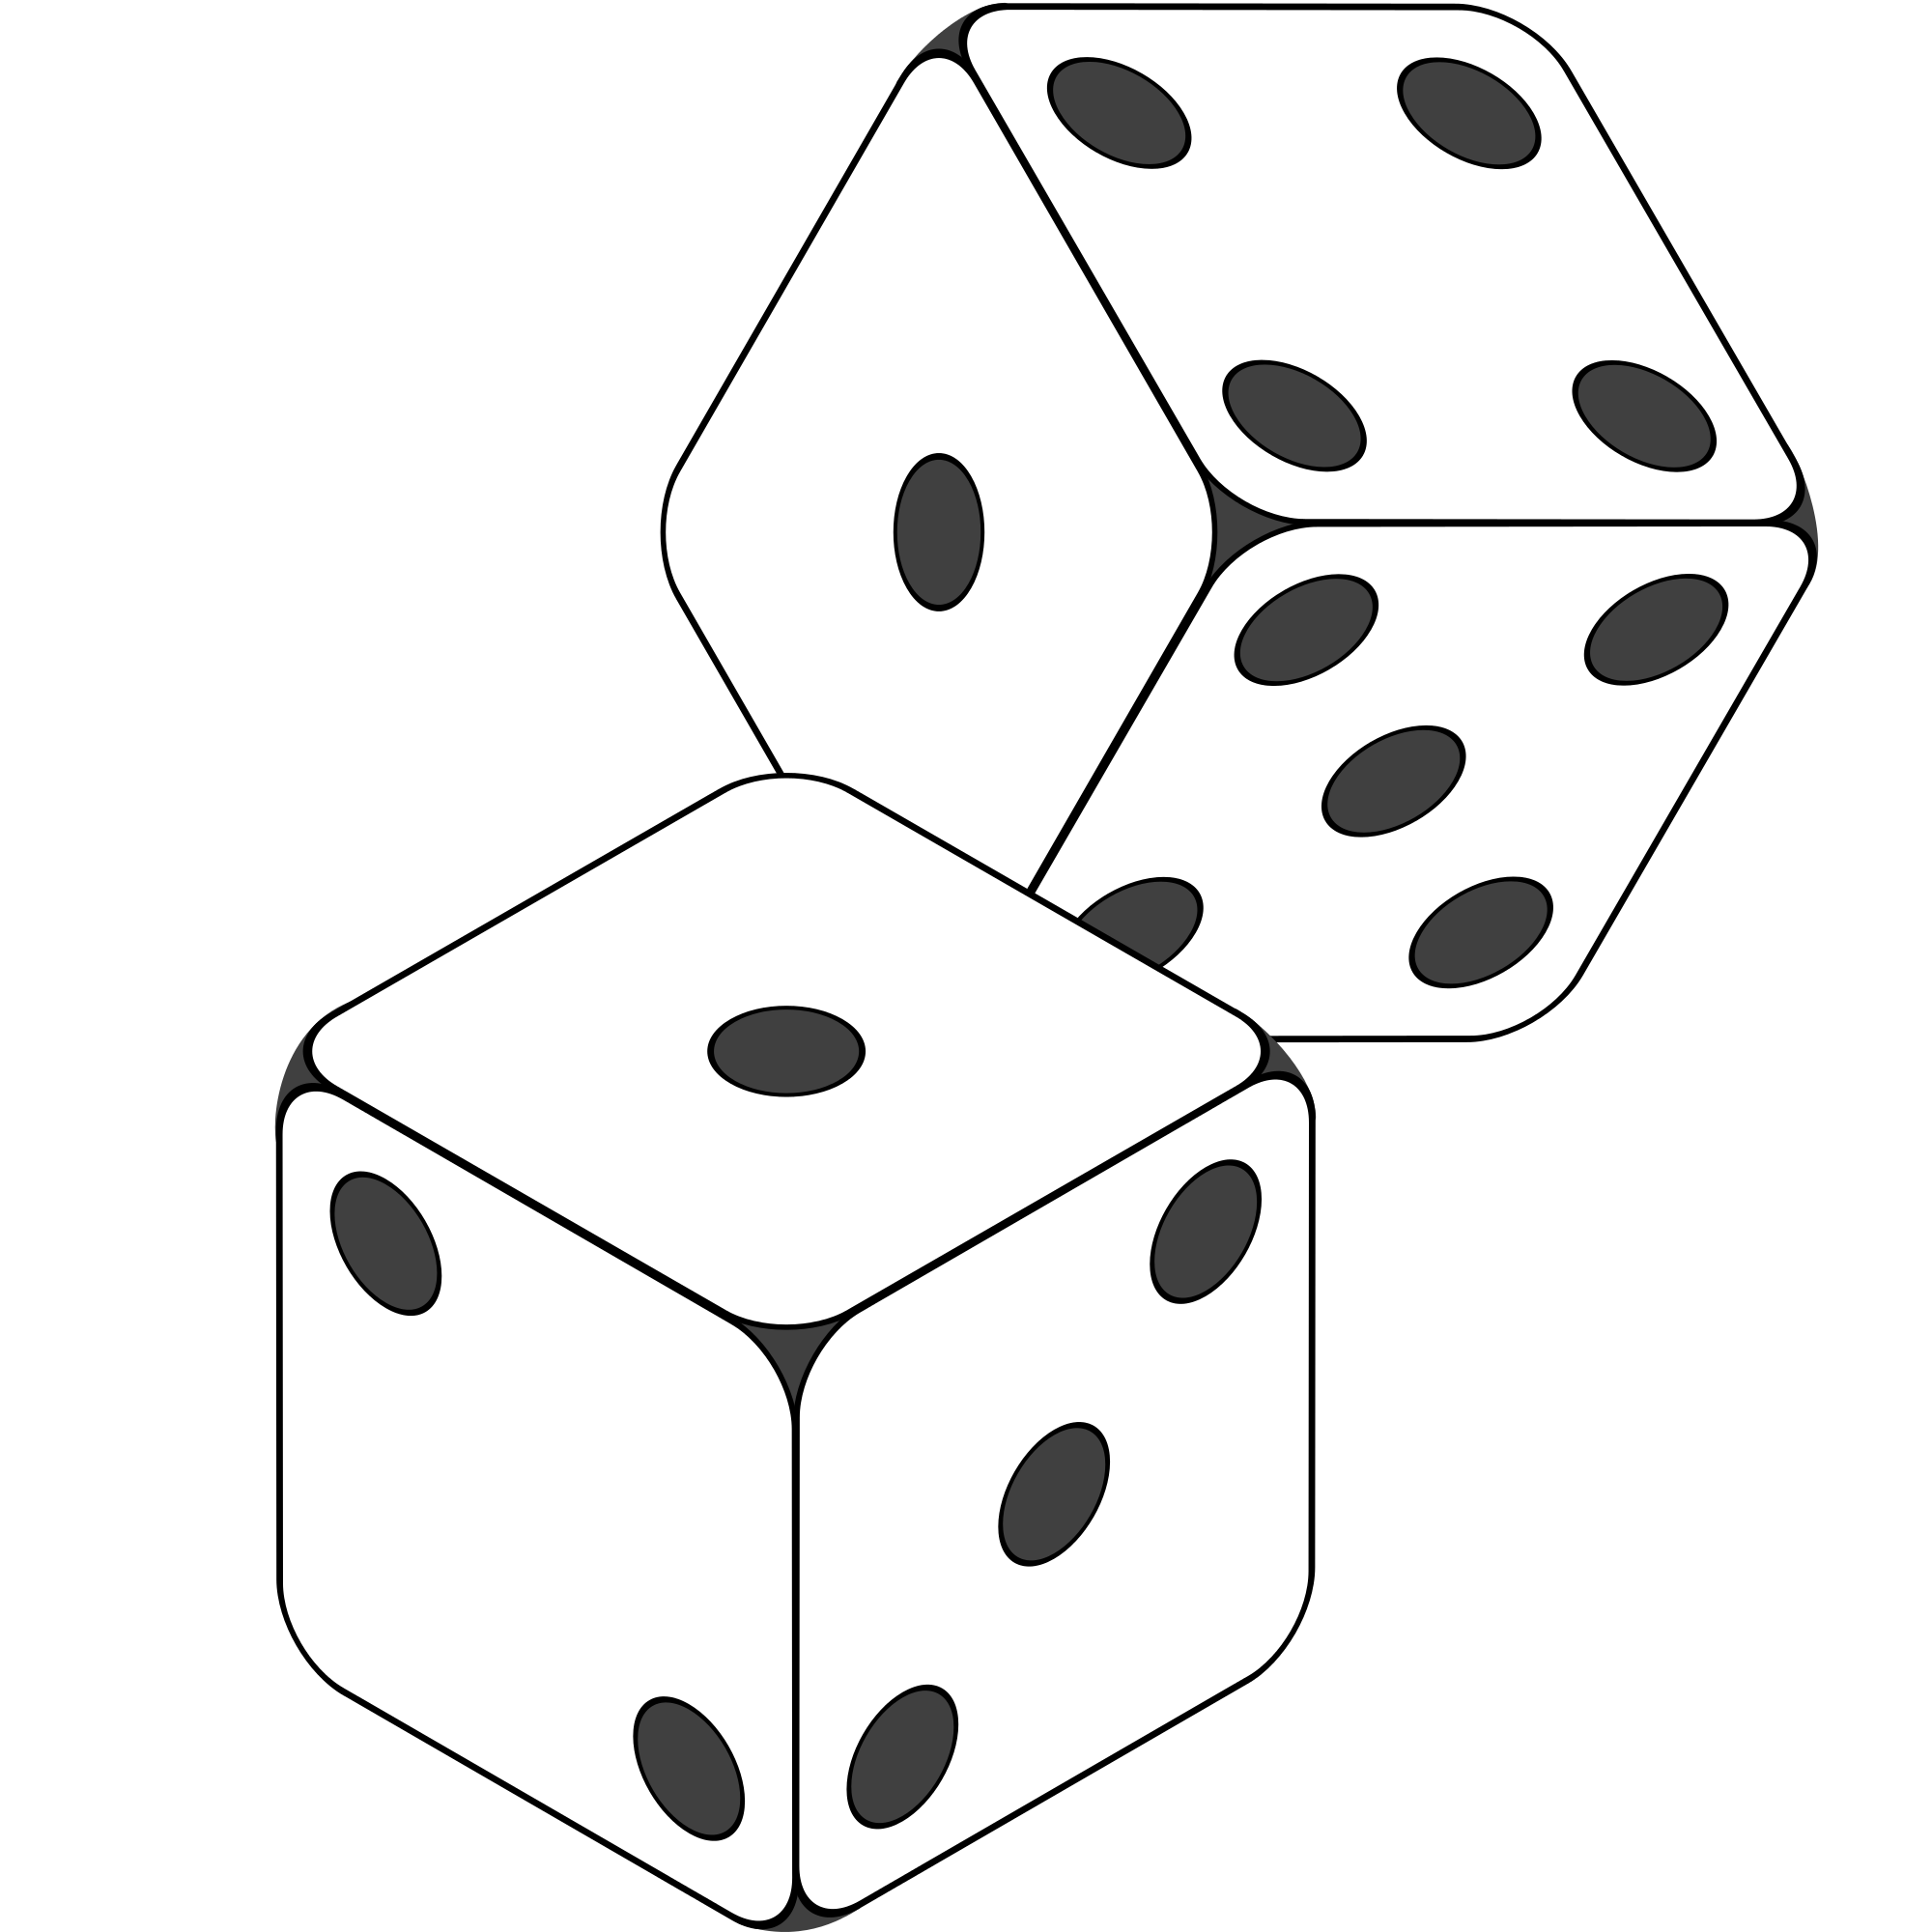 Free Dice Faces Png Download Free Dice Faces Png Png Images Free Cliparts On Clipart Library